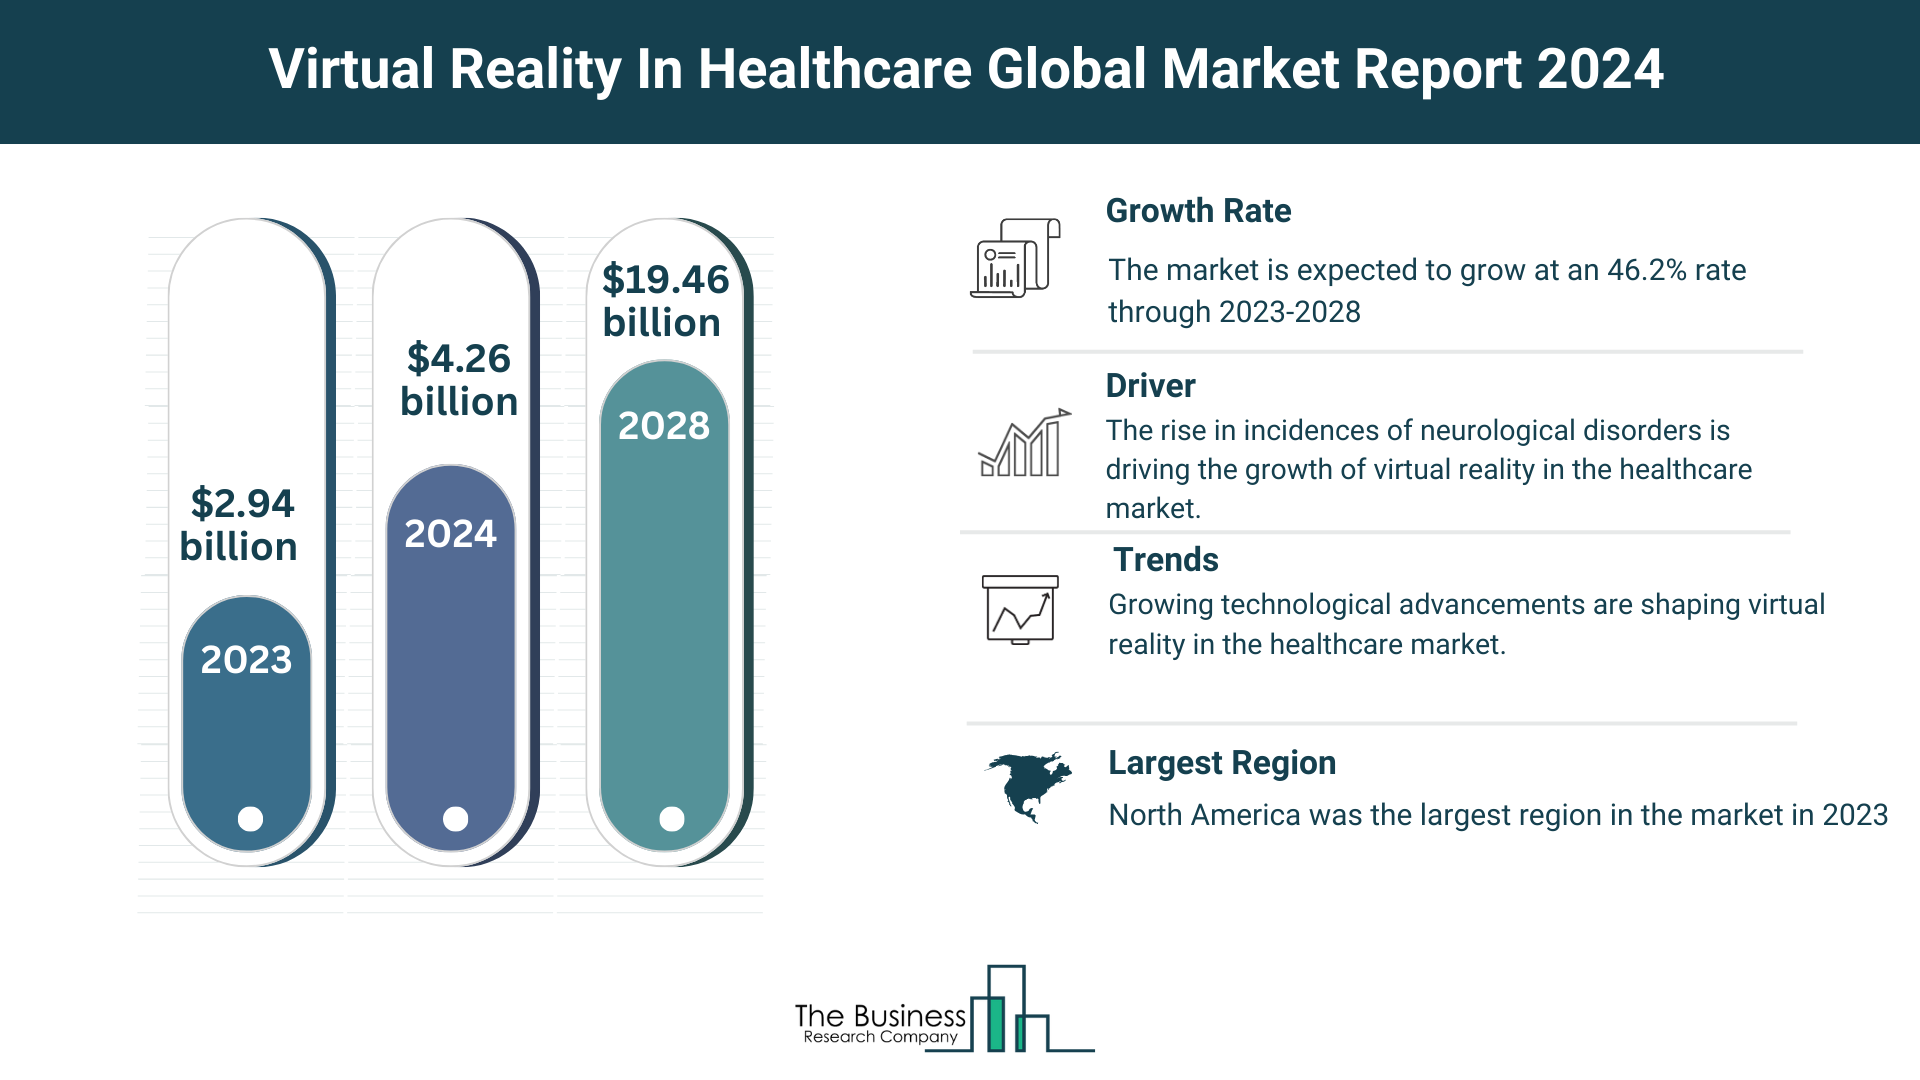 5 Major Insights Into The Virtual Reality In Healthcare Market Report 2024